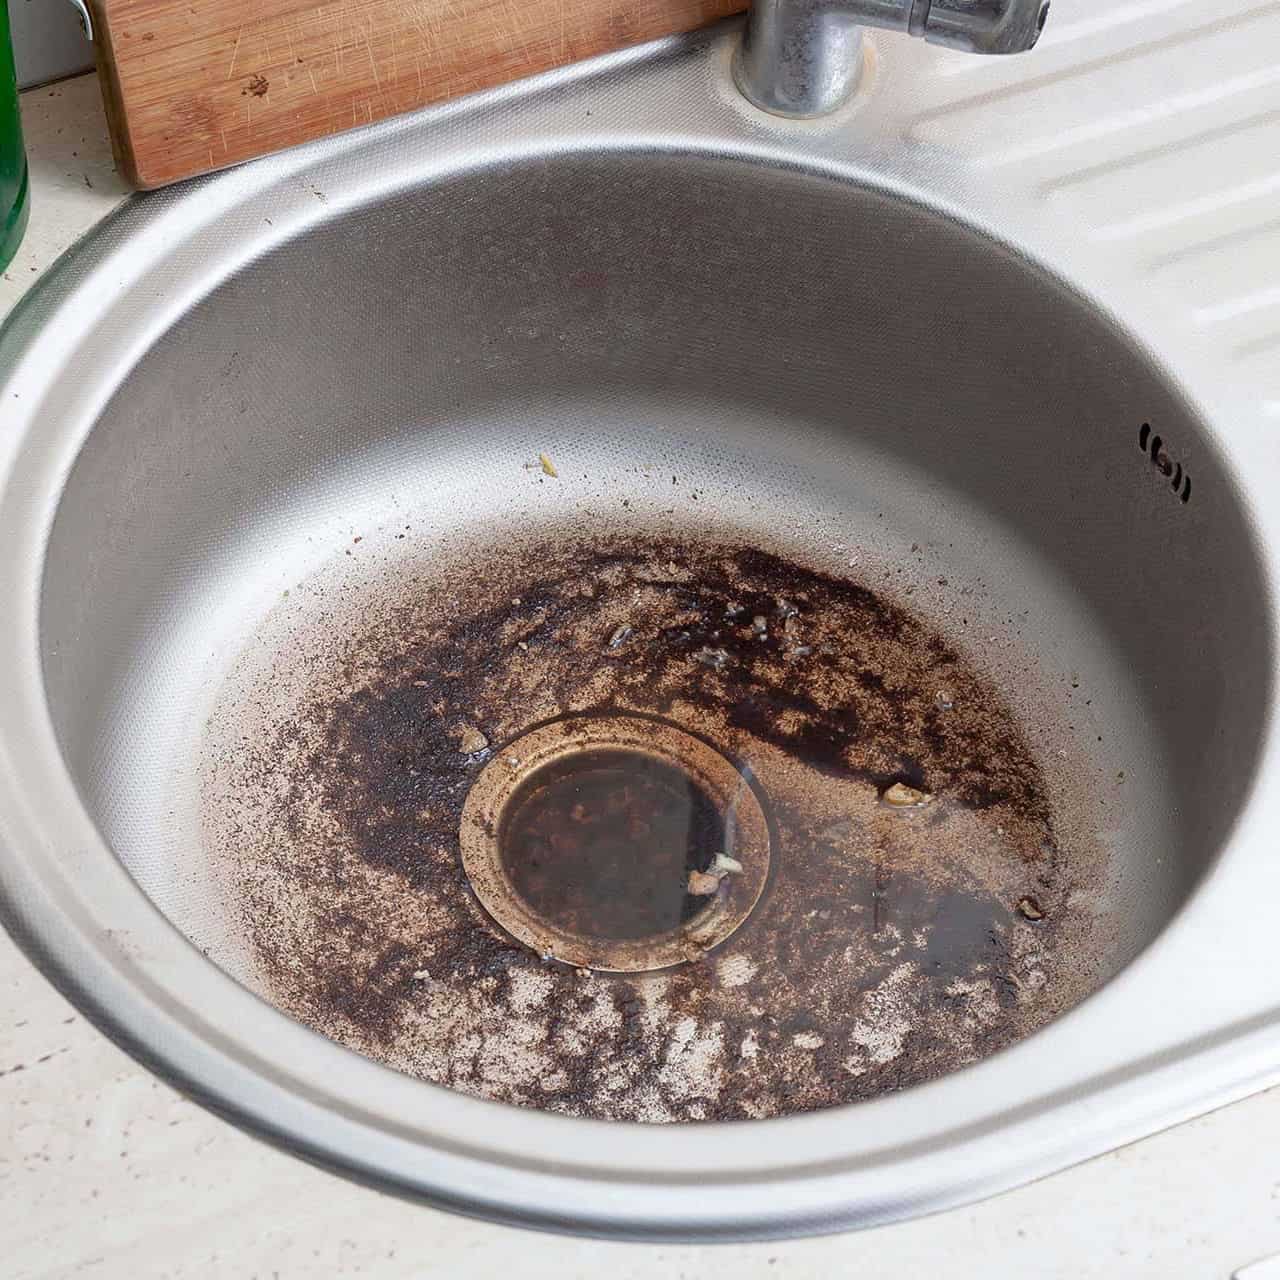 Can Snaking a Drain Make it Worse?